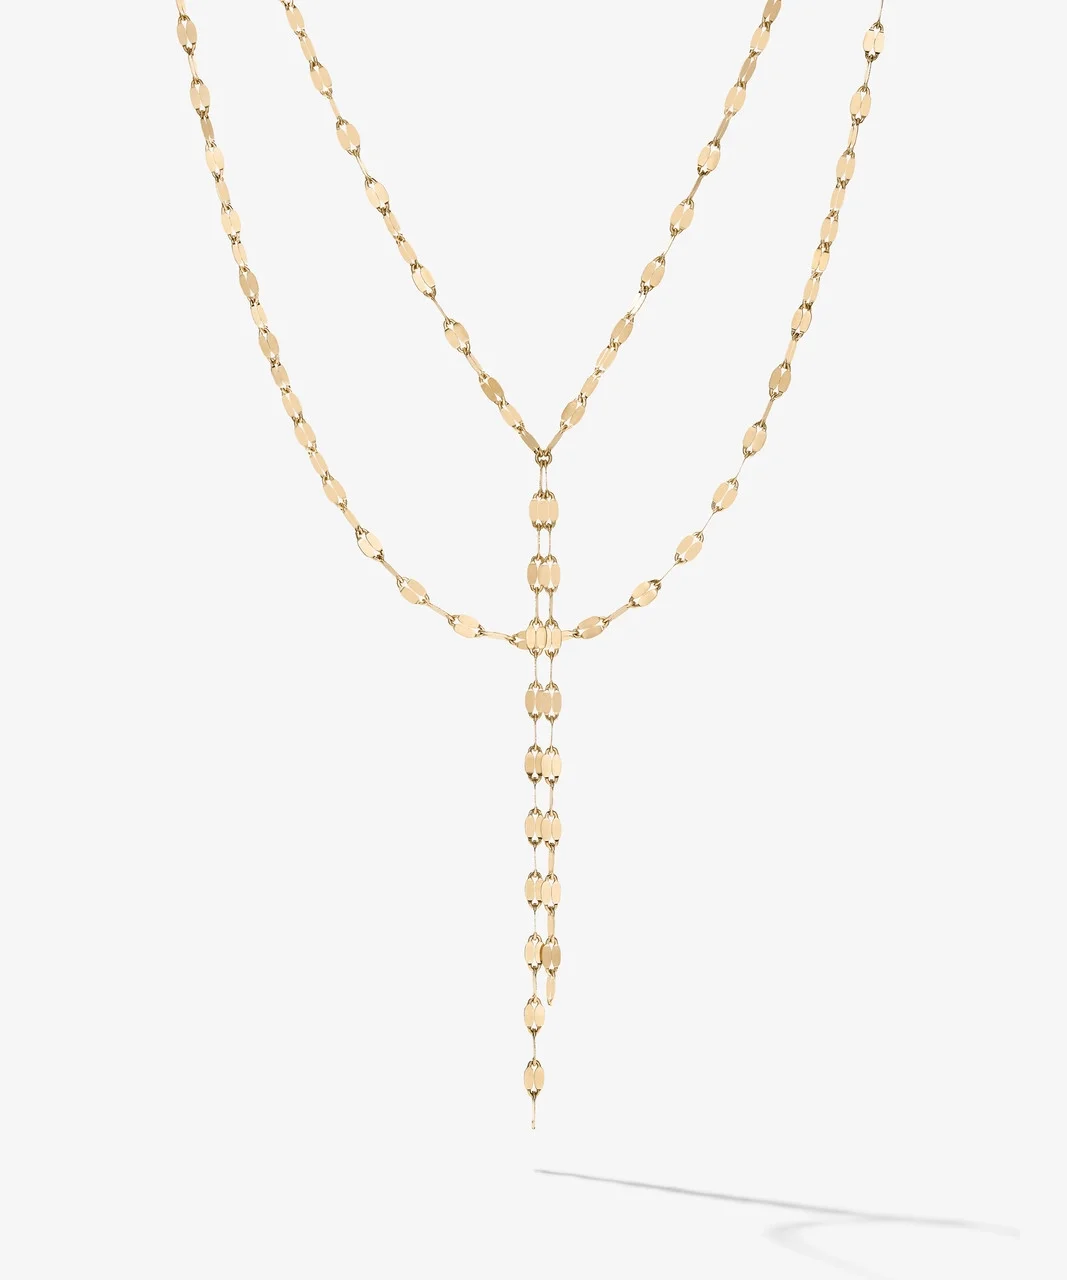 The 20th Anniversary Blake Necklace